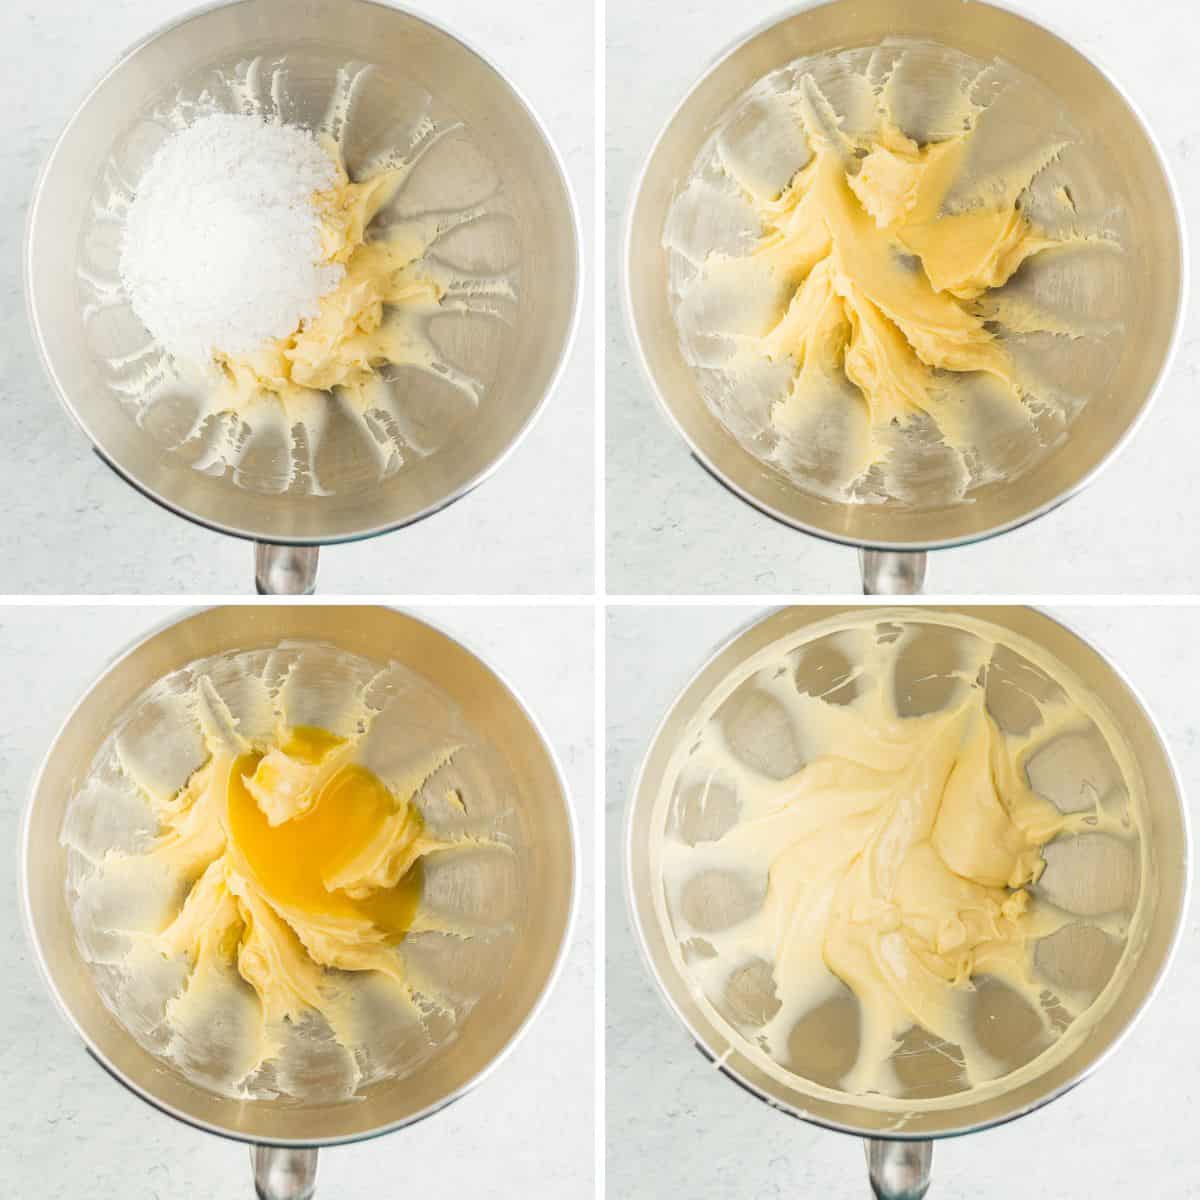 4 photos showing the process of making icing.